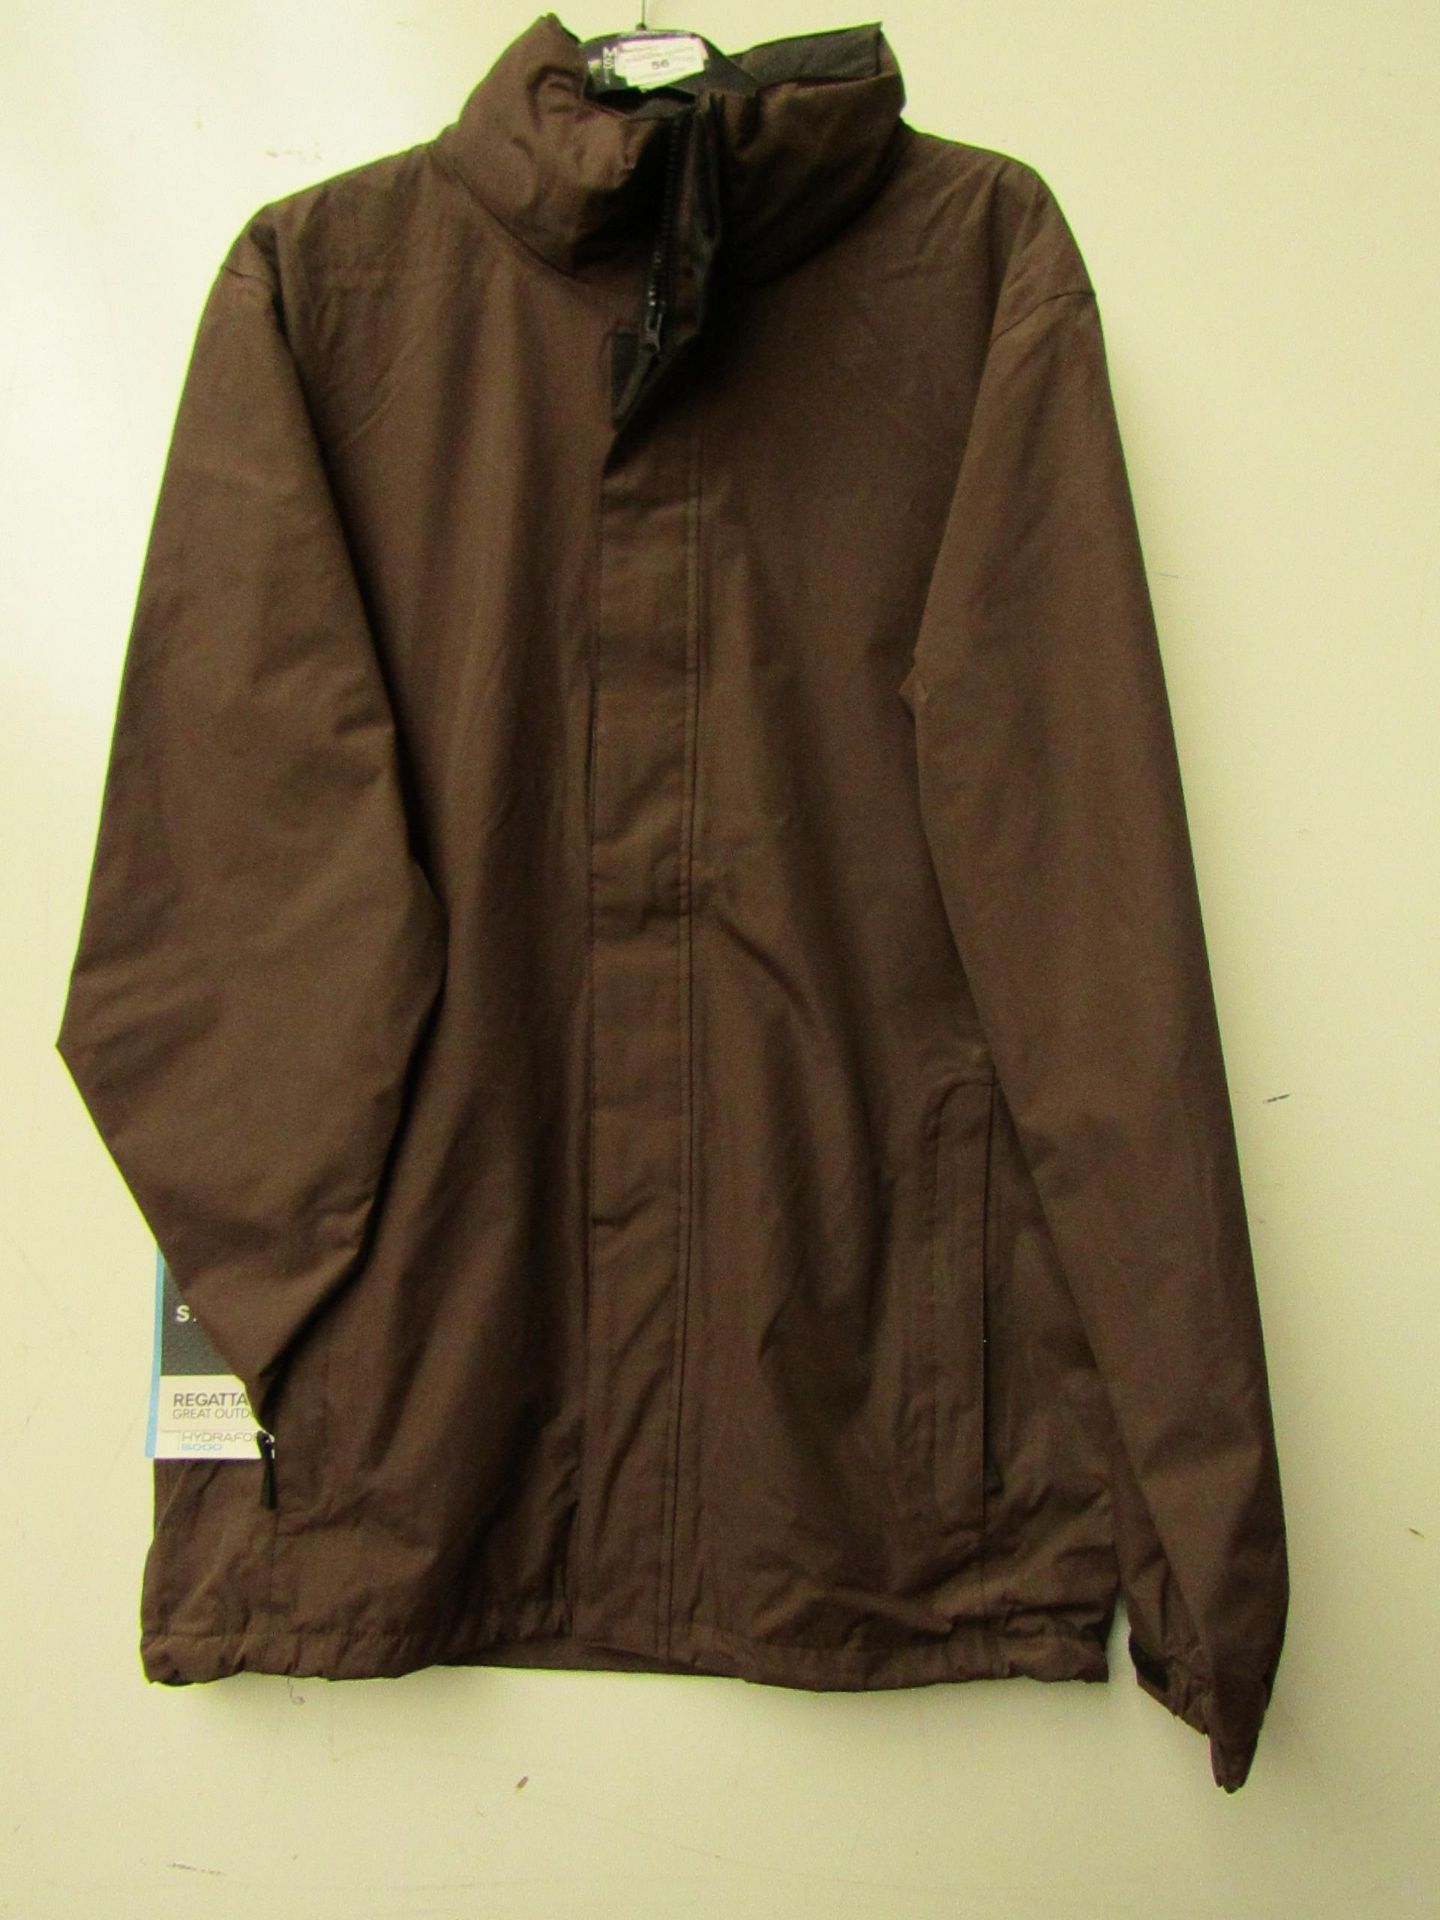 Regatta Size Small Mens Coat. New with Tags but shop soiled so will need a clean